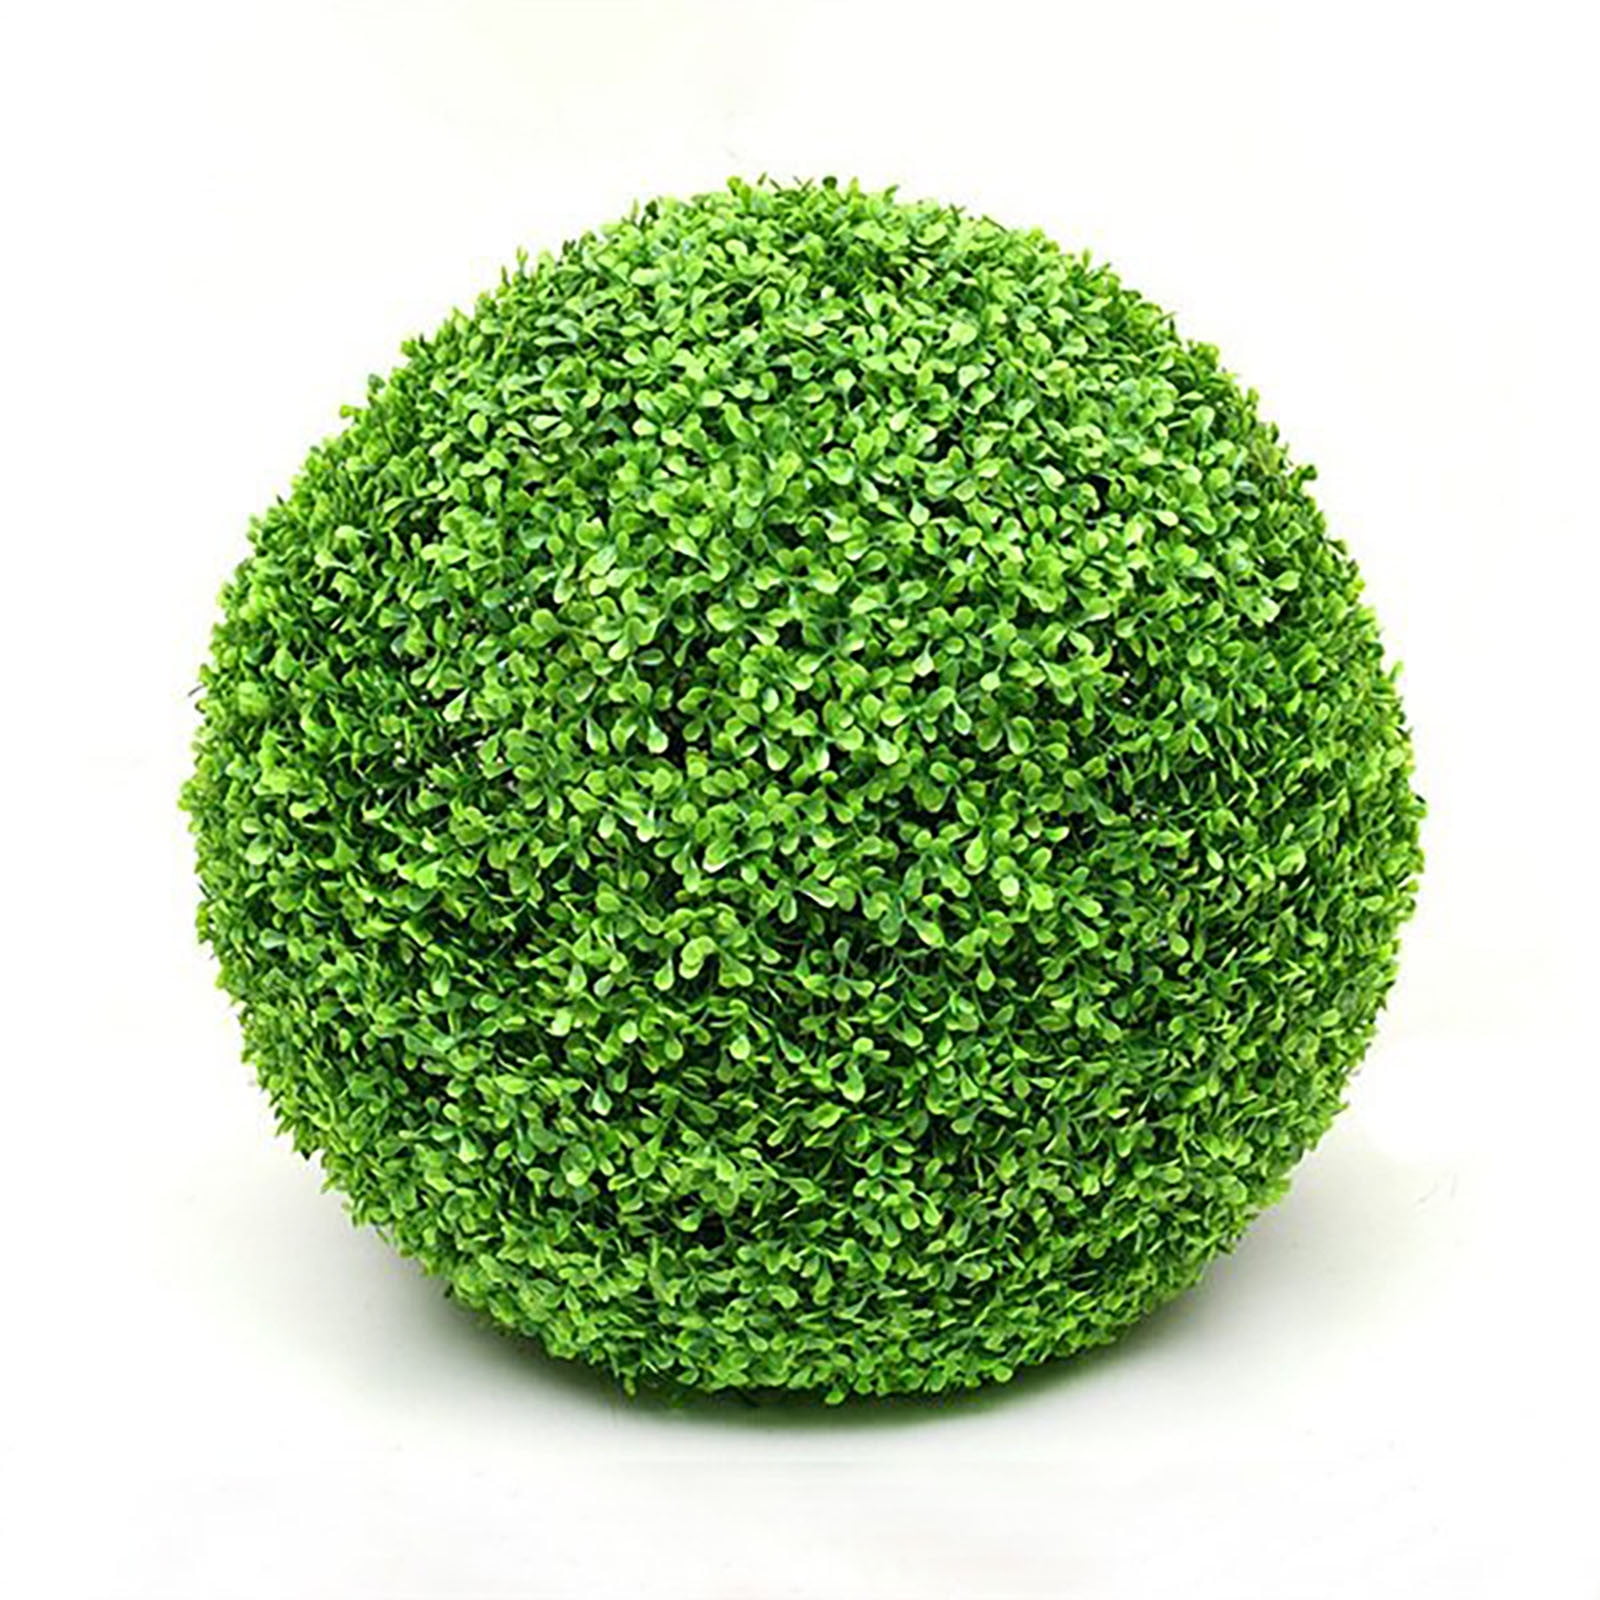 Artifical Plastic Green Grass Ball Topiary Hanging Plant Garland Decorations 